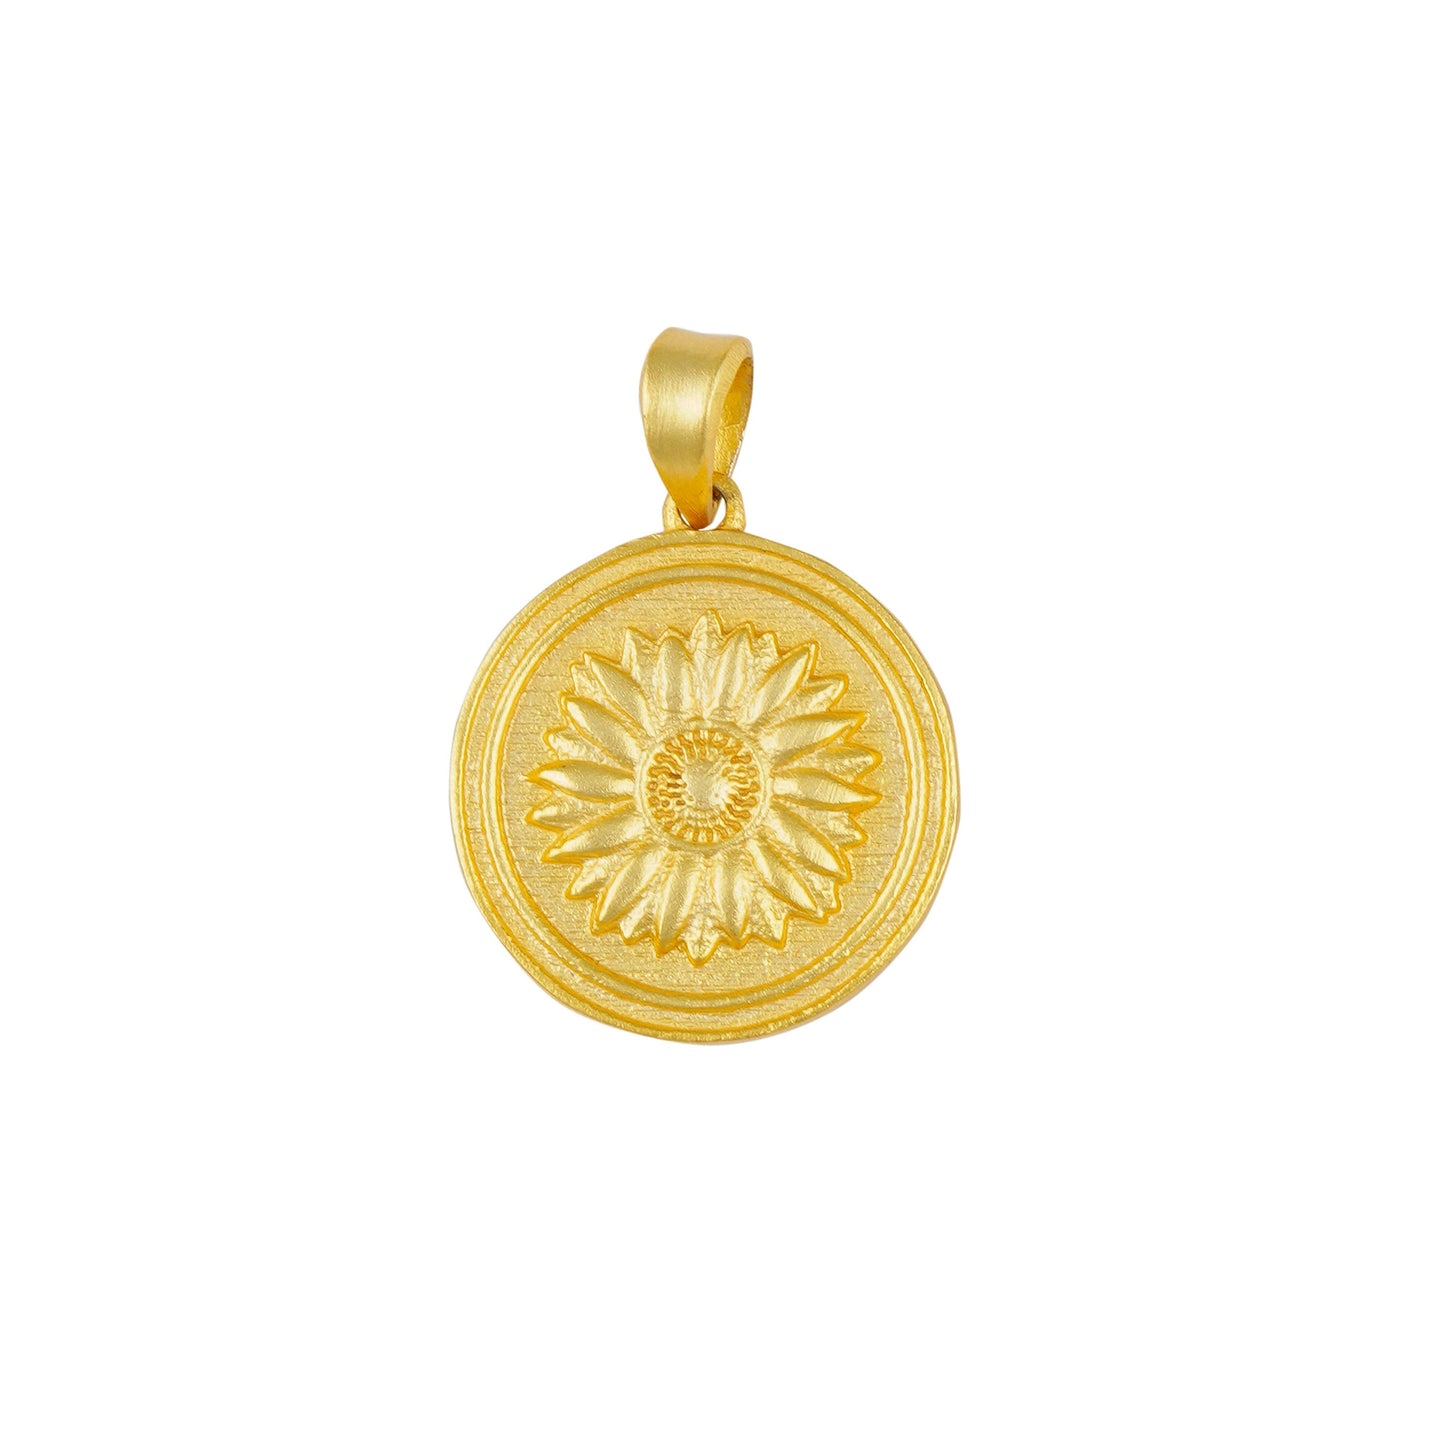 Power of Belief Coin Necklace - Good Fortune